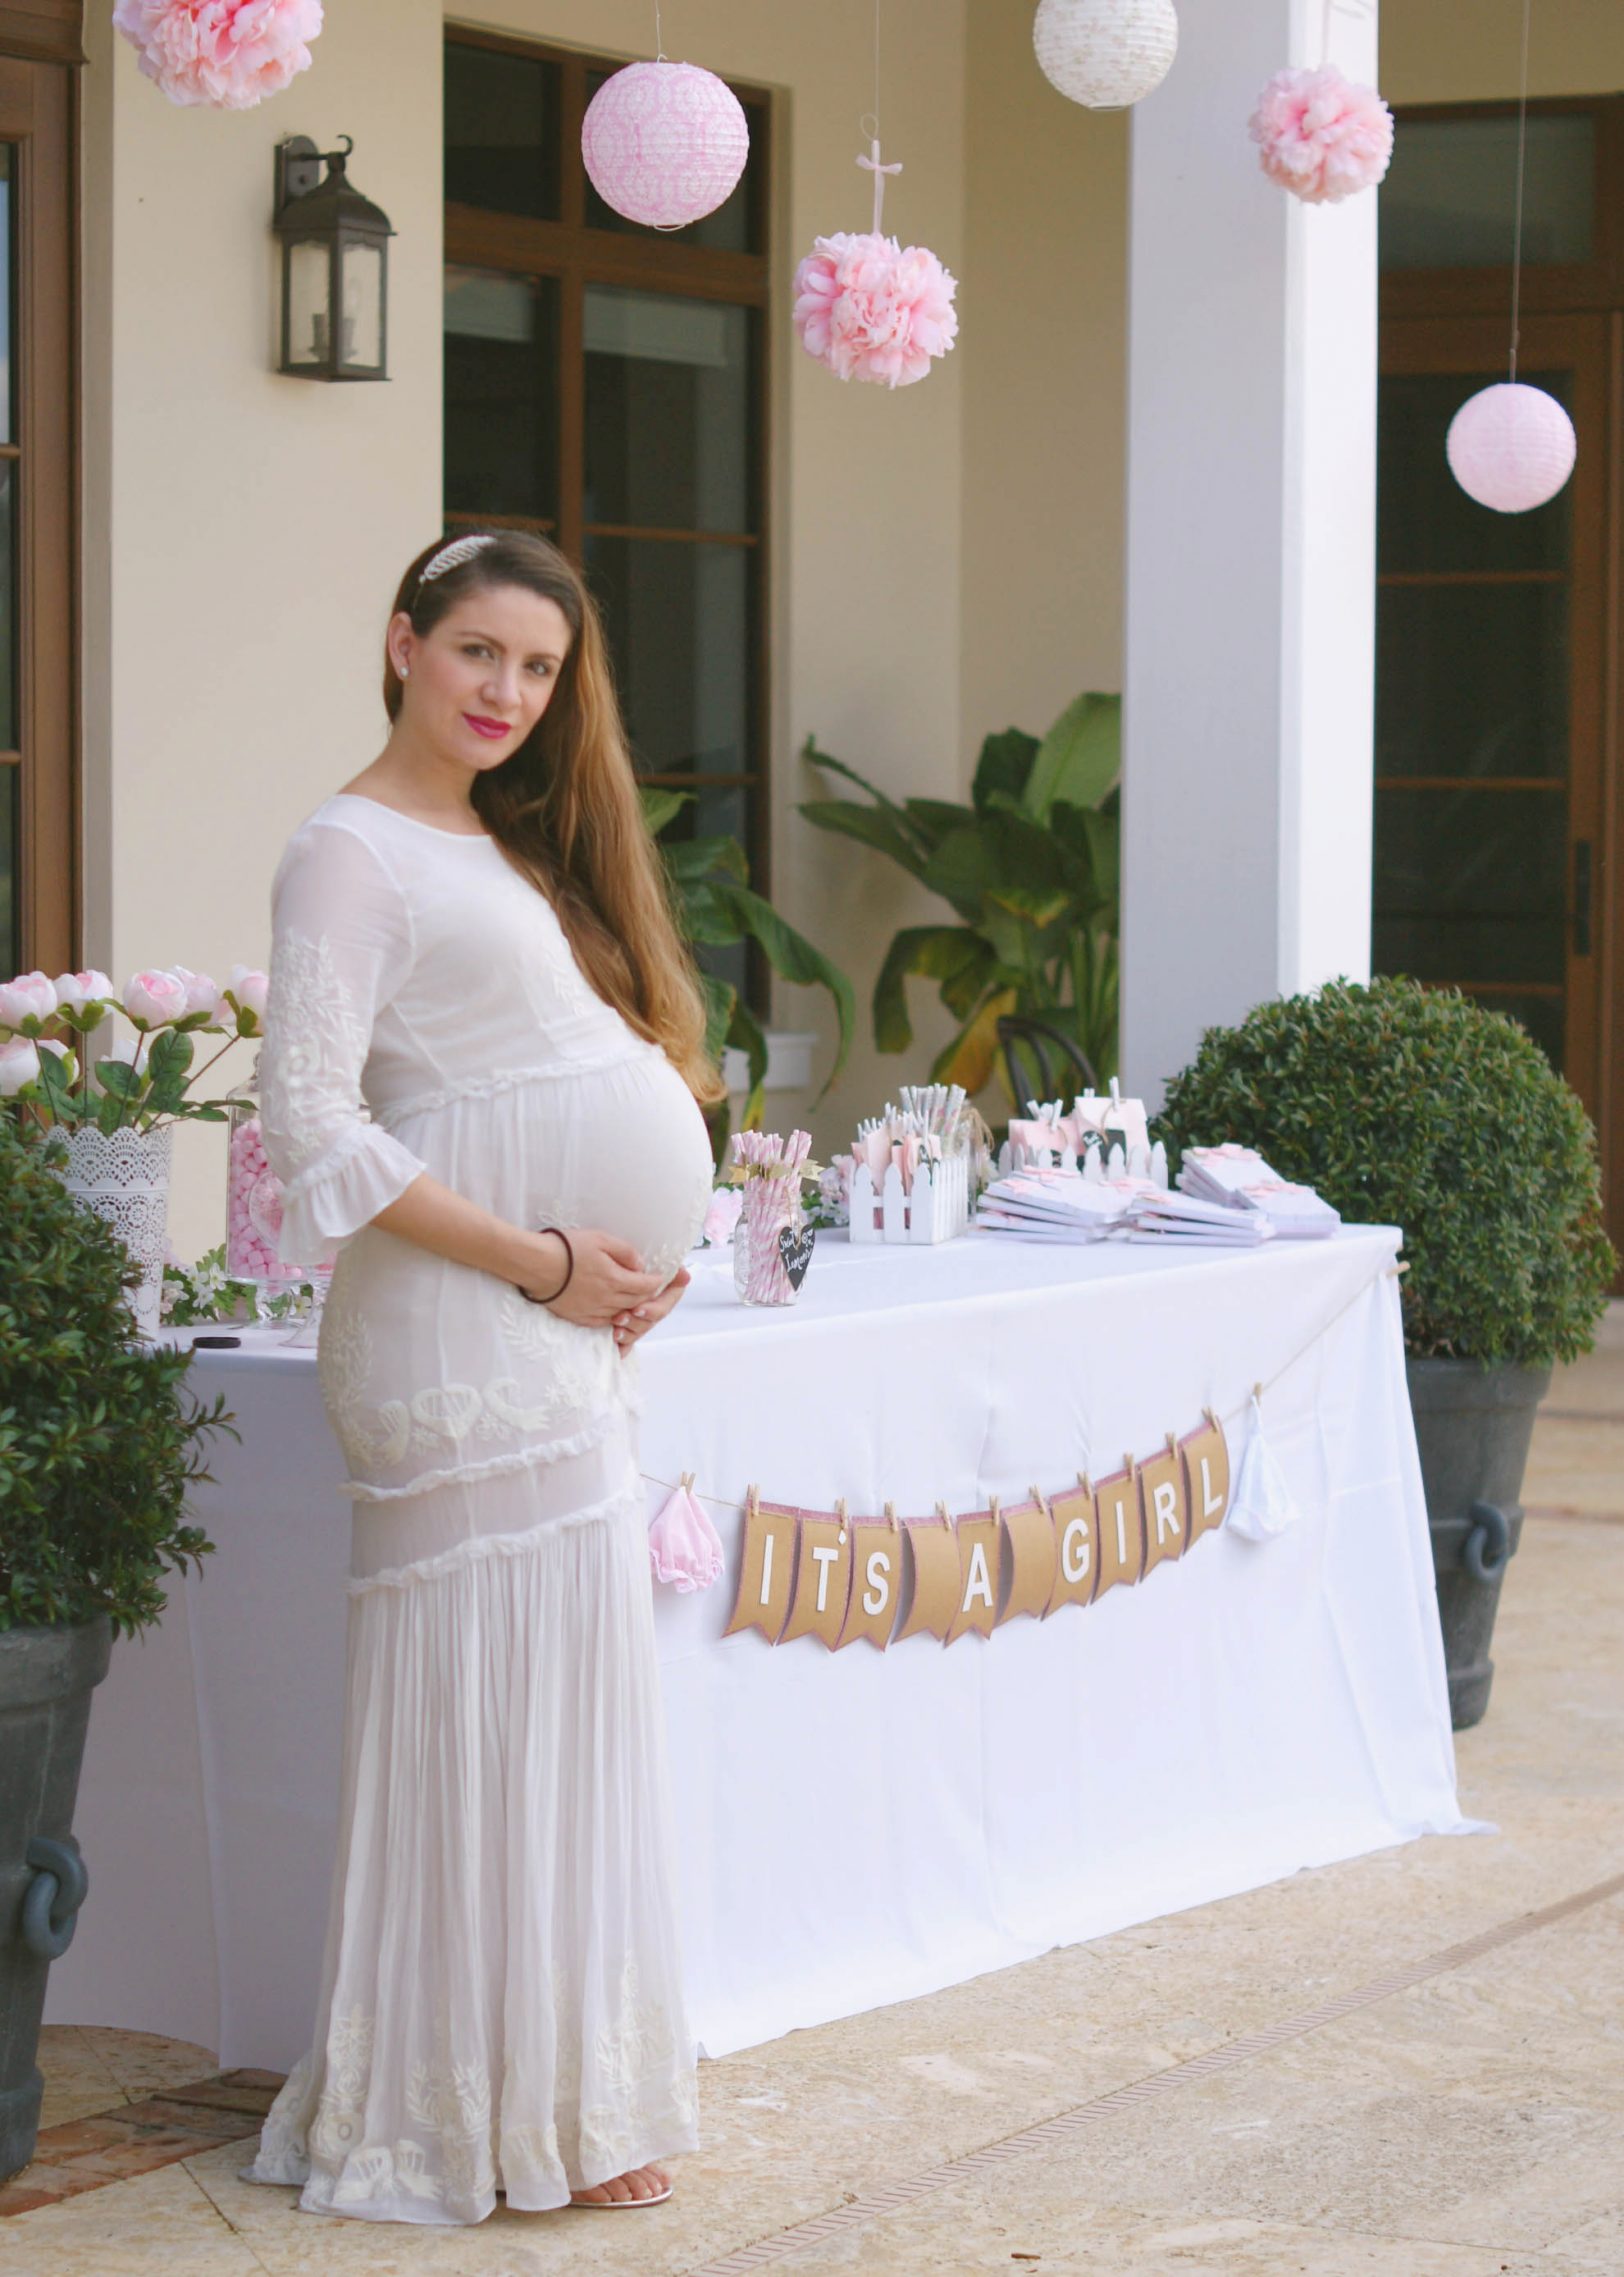 Full Size of Baby Shower:baby Shower Dresses Trendy Affordable Maternity Clothes Inexpensive Maternity Clothes Maternity Dresses For Photoshoot Maternity Blouses For Baby Shower Plus Size Maternity Dresses For Baby Shower What Should I Wear To My Baby Shower Plus Size Maternity Clothes